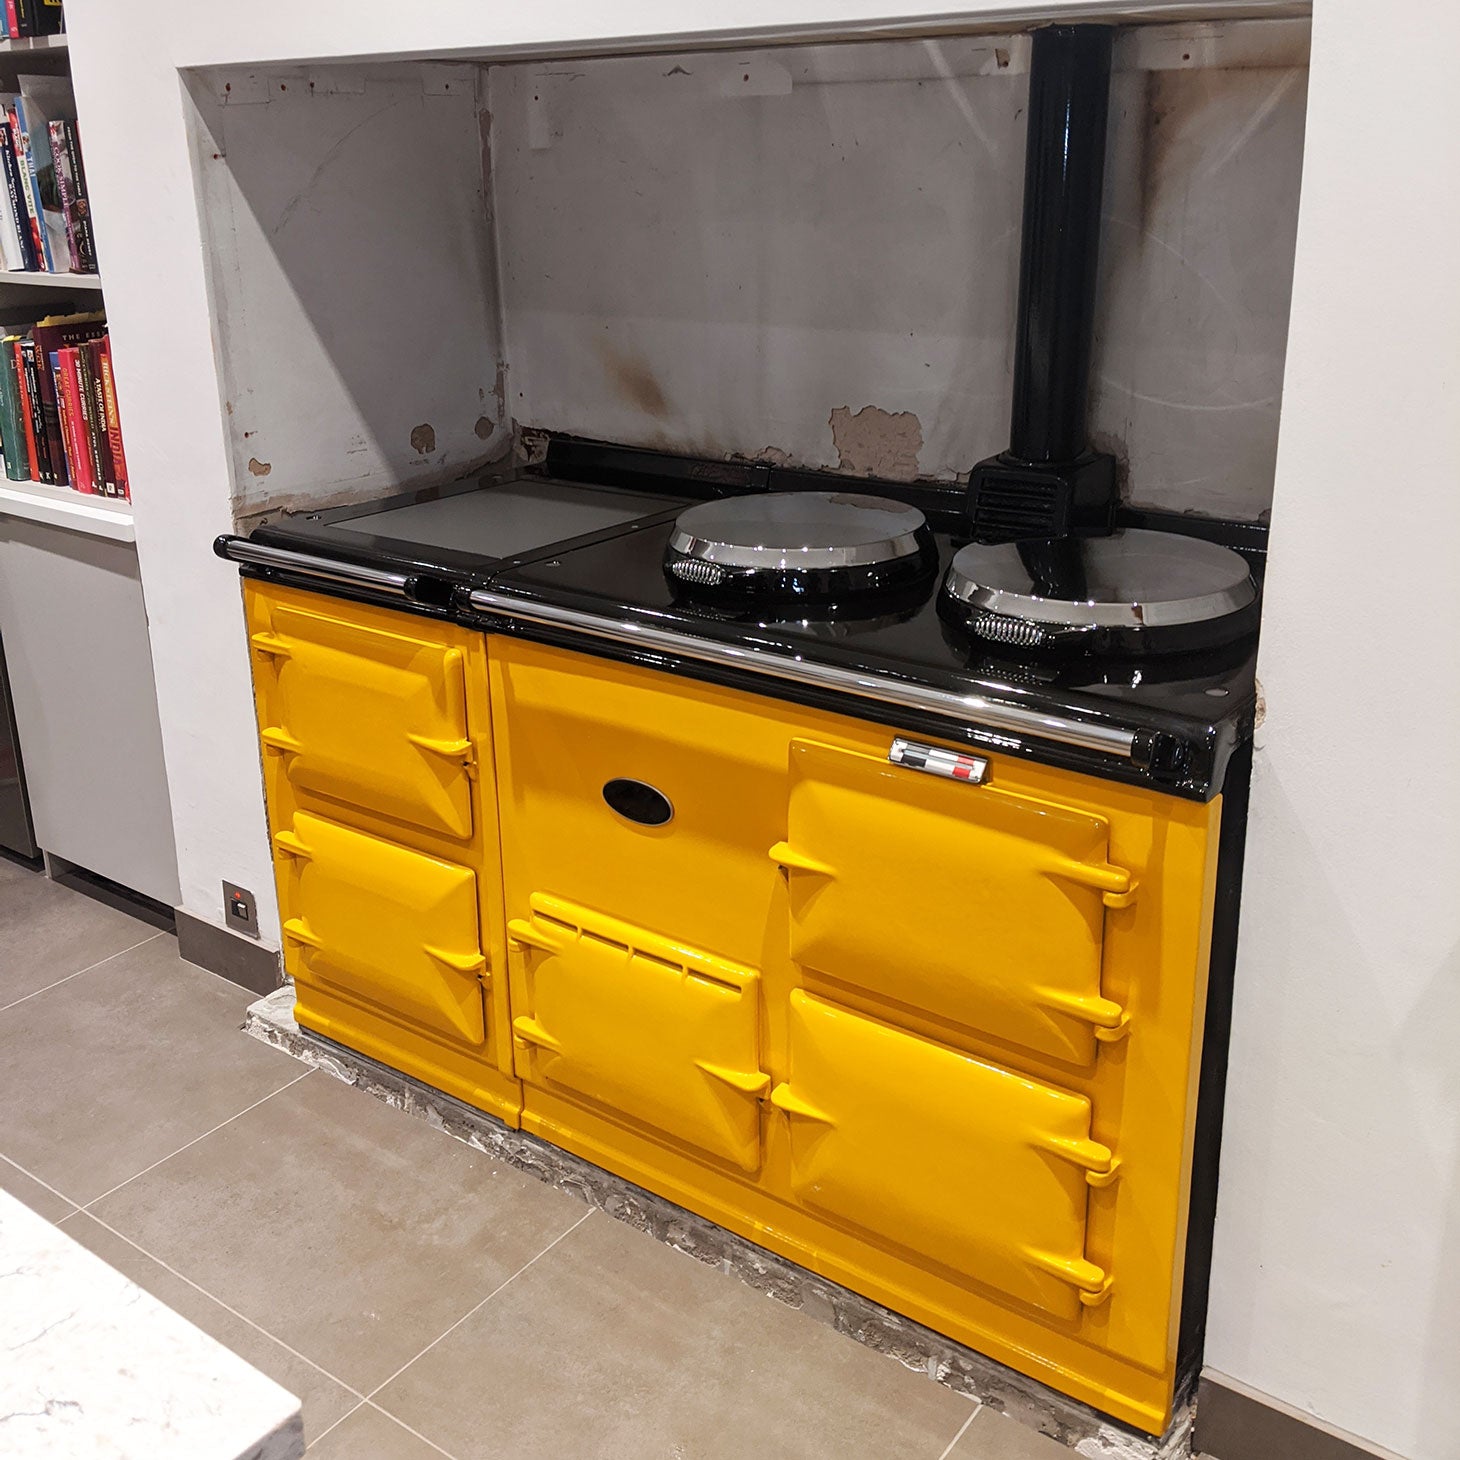 Bring a bit of sunshine to your kitchen - A Yellow Aga Range Cooker!